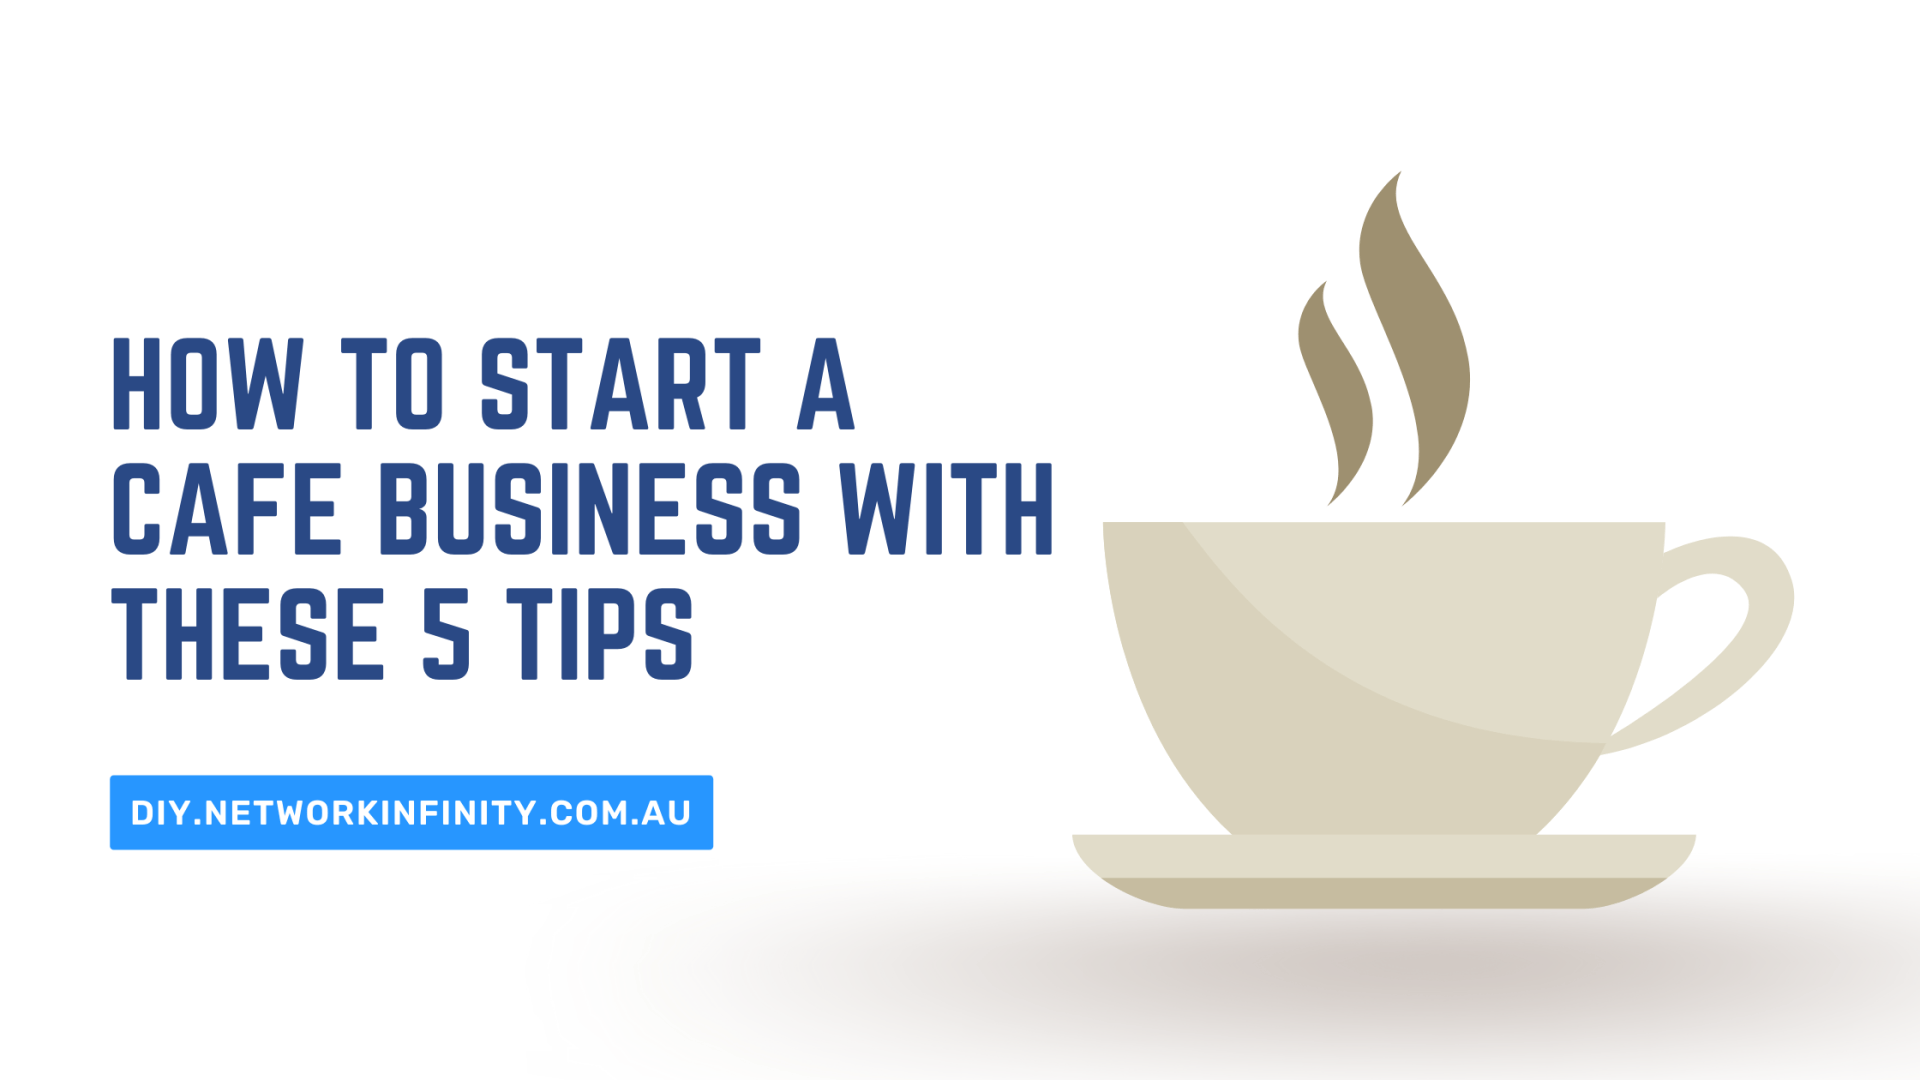 How To Start A Cafe Business With These 5 Tips